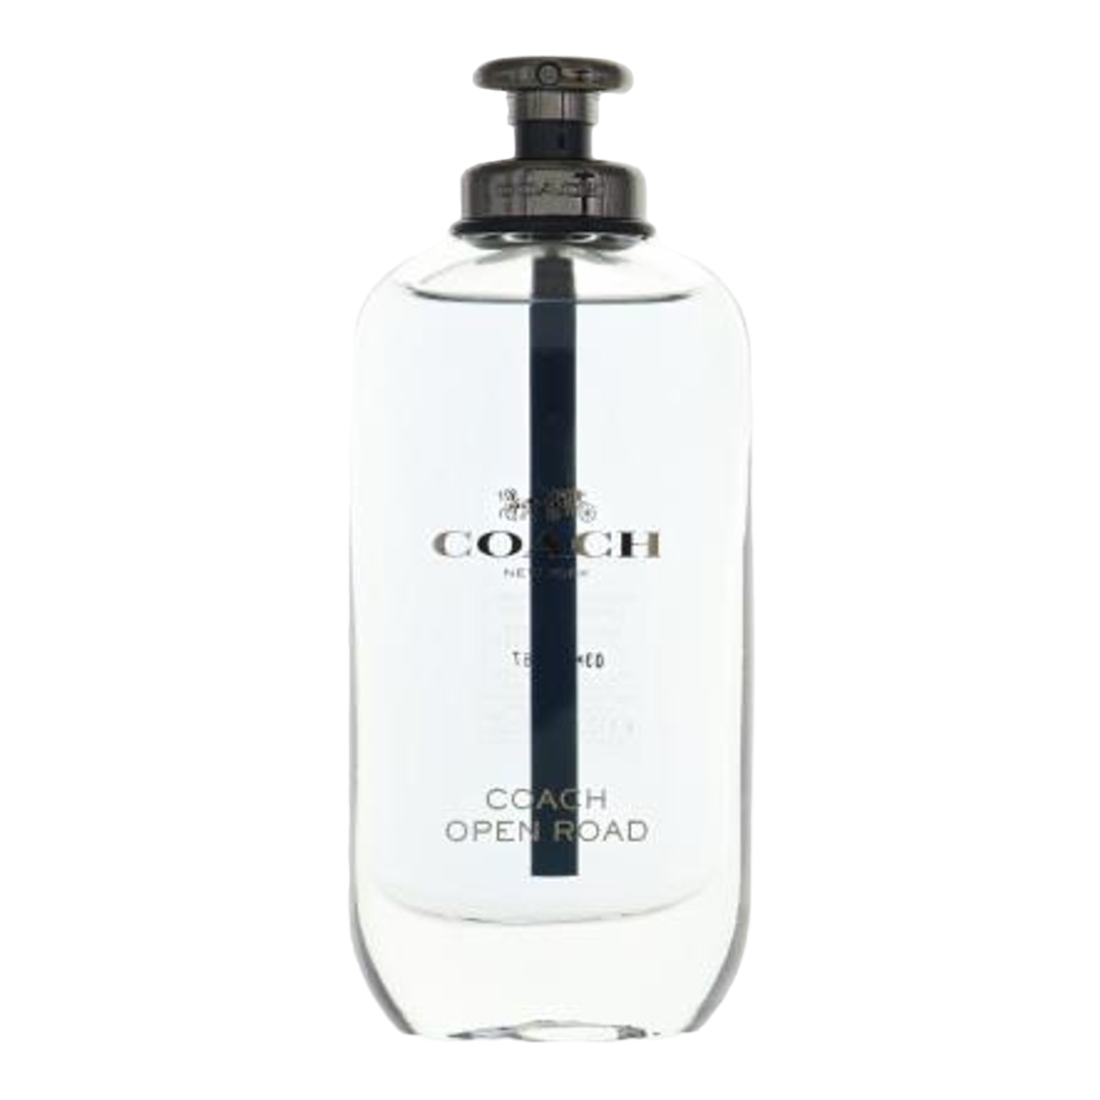 COACH OPEN ROAD EDT 100ML TESTER